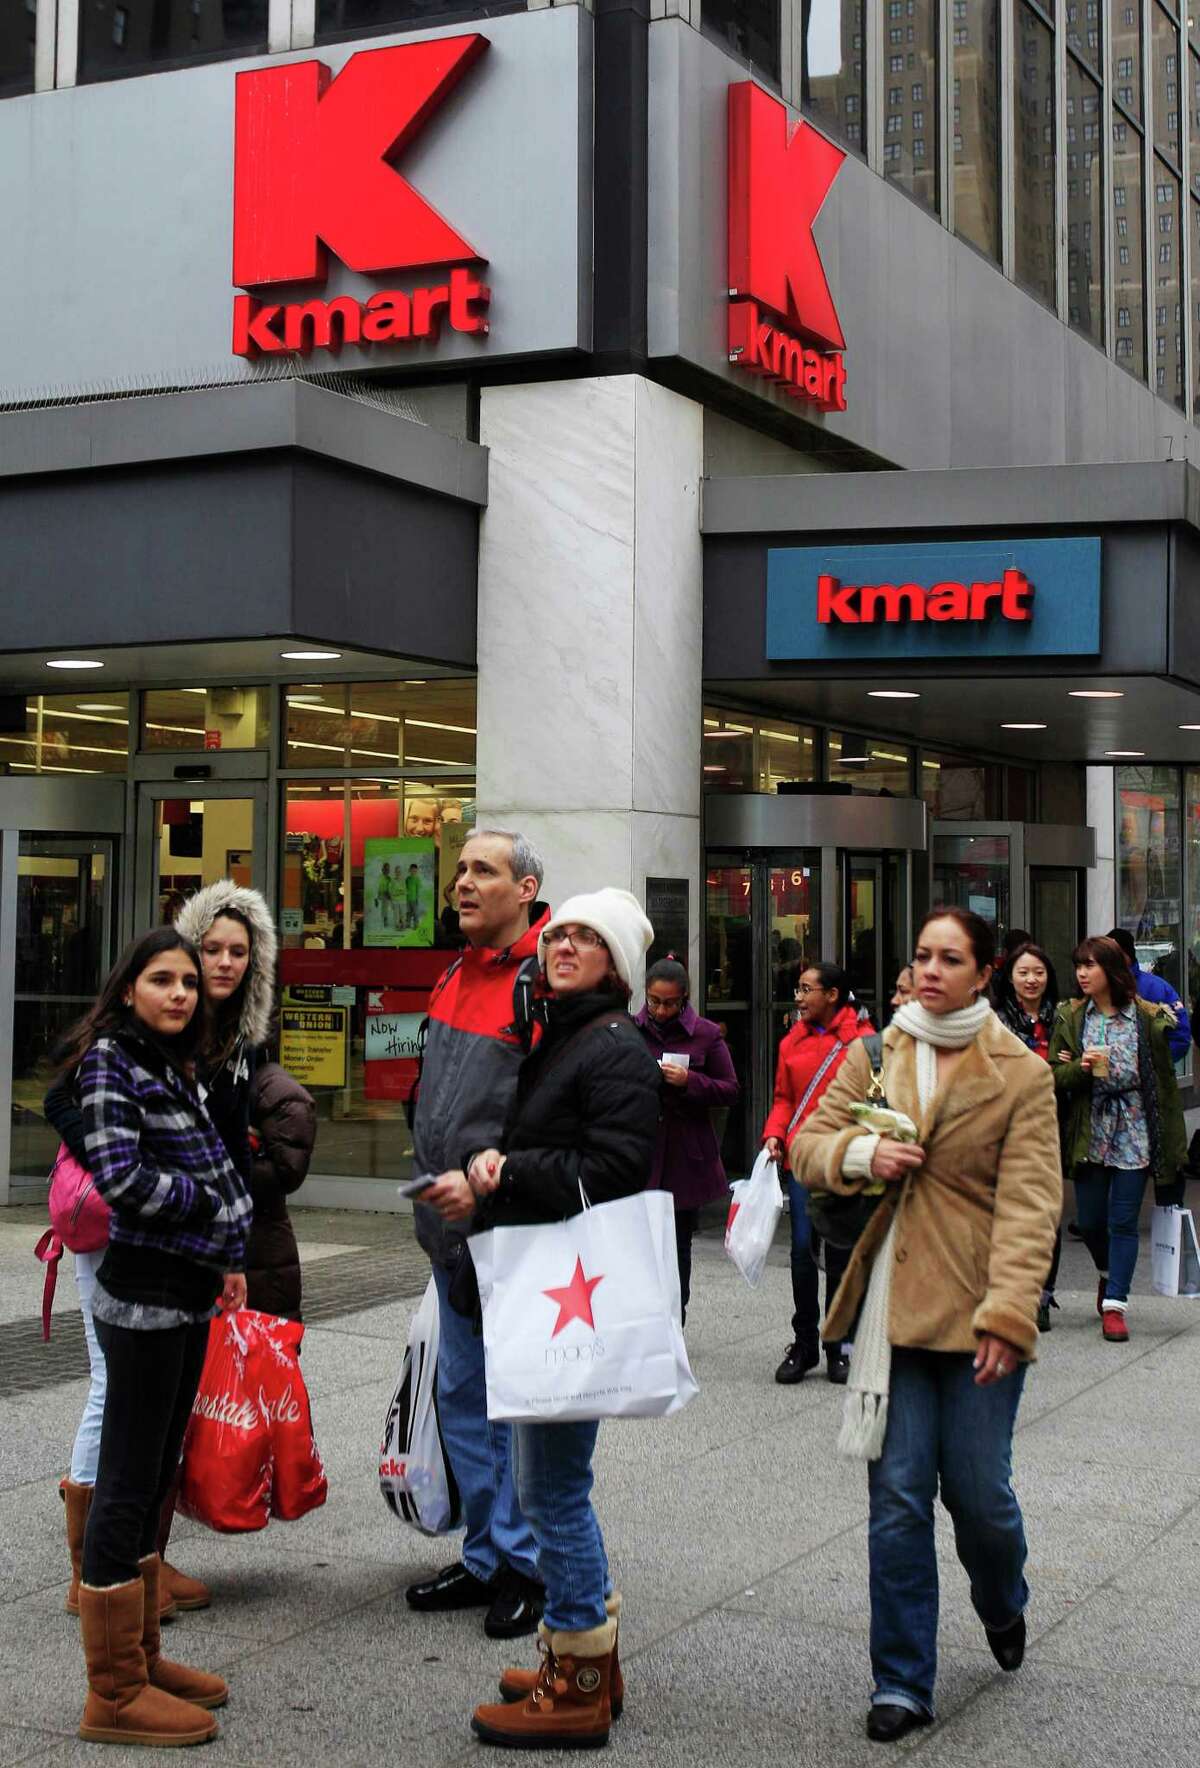 FILE - In this Tuesday, Dec. 27, 2011 file photo, pedestrians pass a Kmart store location in New York. On Friday, Oct. 10, 2014, Sears Holdings Corp. announced that it detected a data breach at its Kmart stores that started in August 2014, affecting certain customers' credit and debit card accounts. The data theft at Kmart is the latest in a string of data thefts that have hit several big retailers, including Target, Supervalu and Home Depot. (AP Photo/Frank Franklin II)